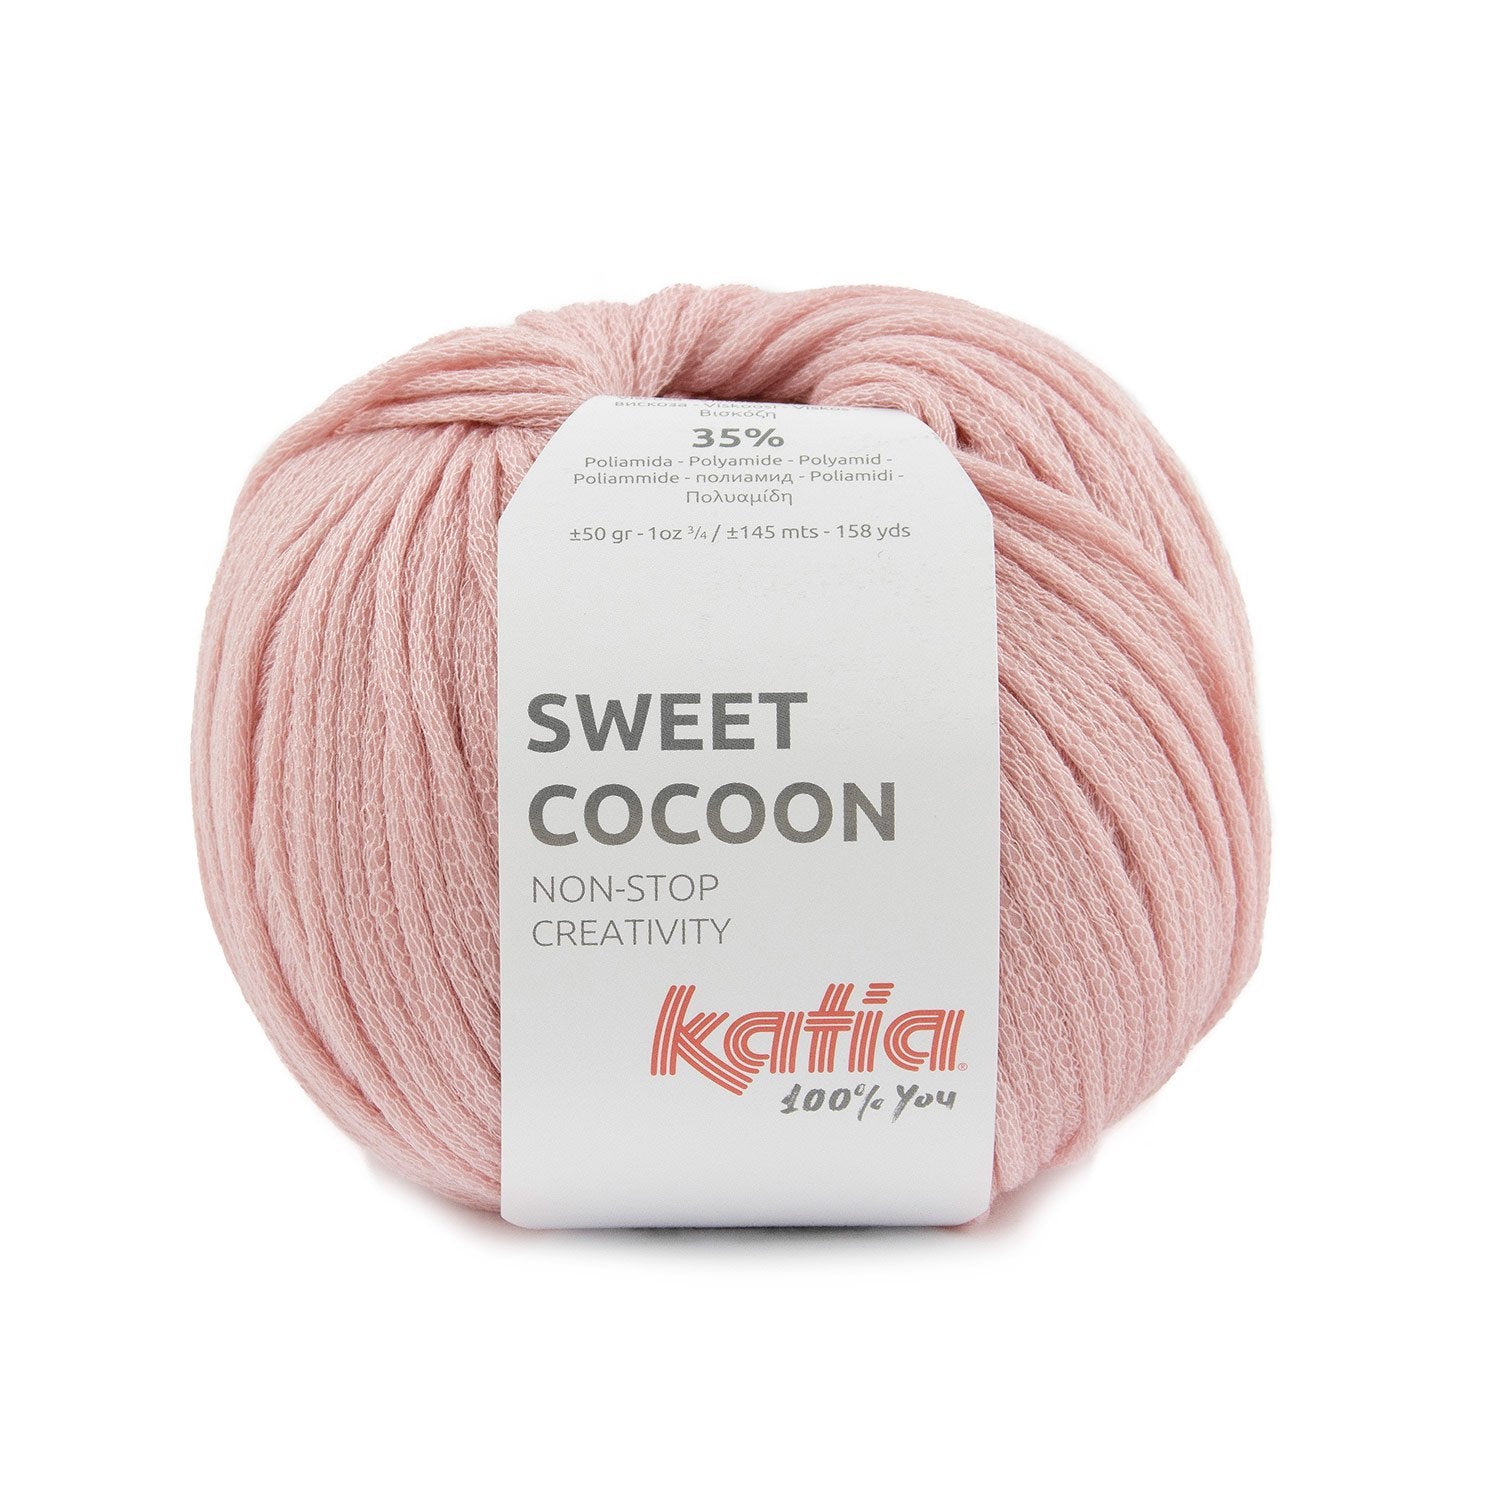 Lana Sweet Cocoon by Katia - Quilting and soft yarn for clothing and home accessories